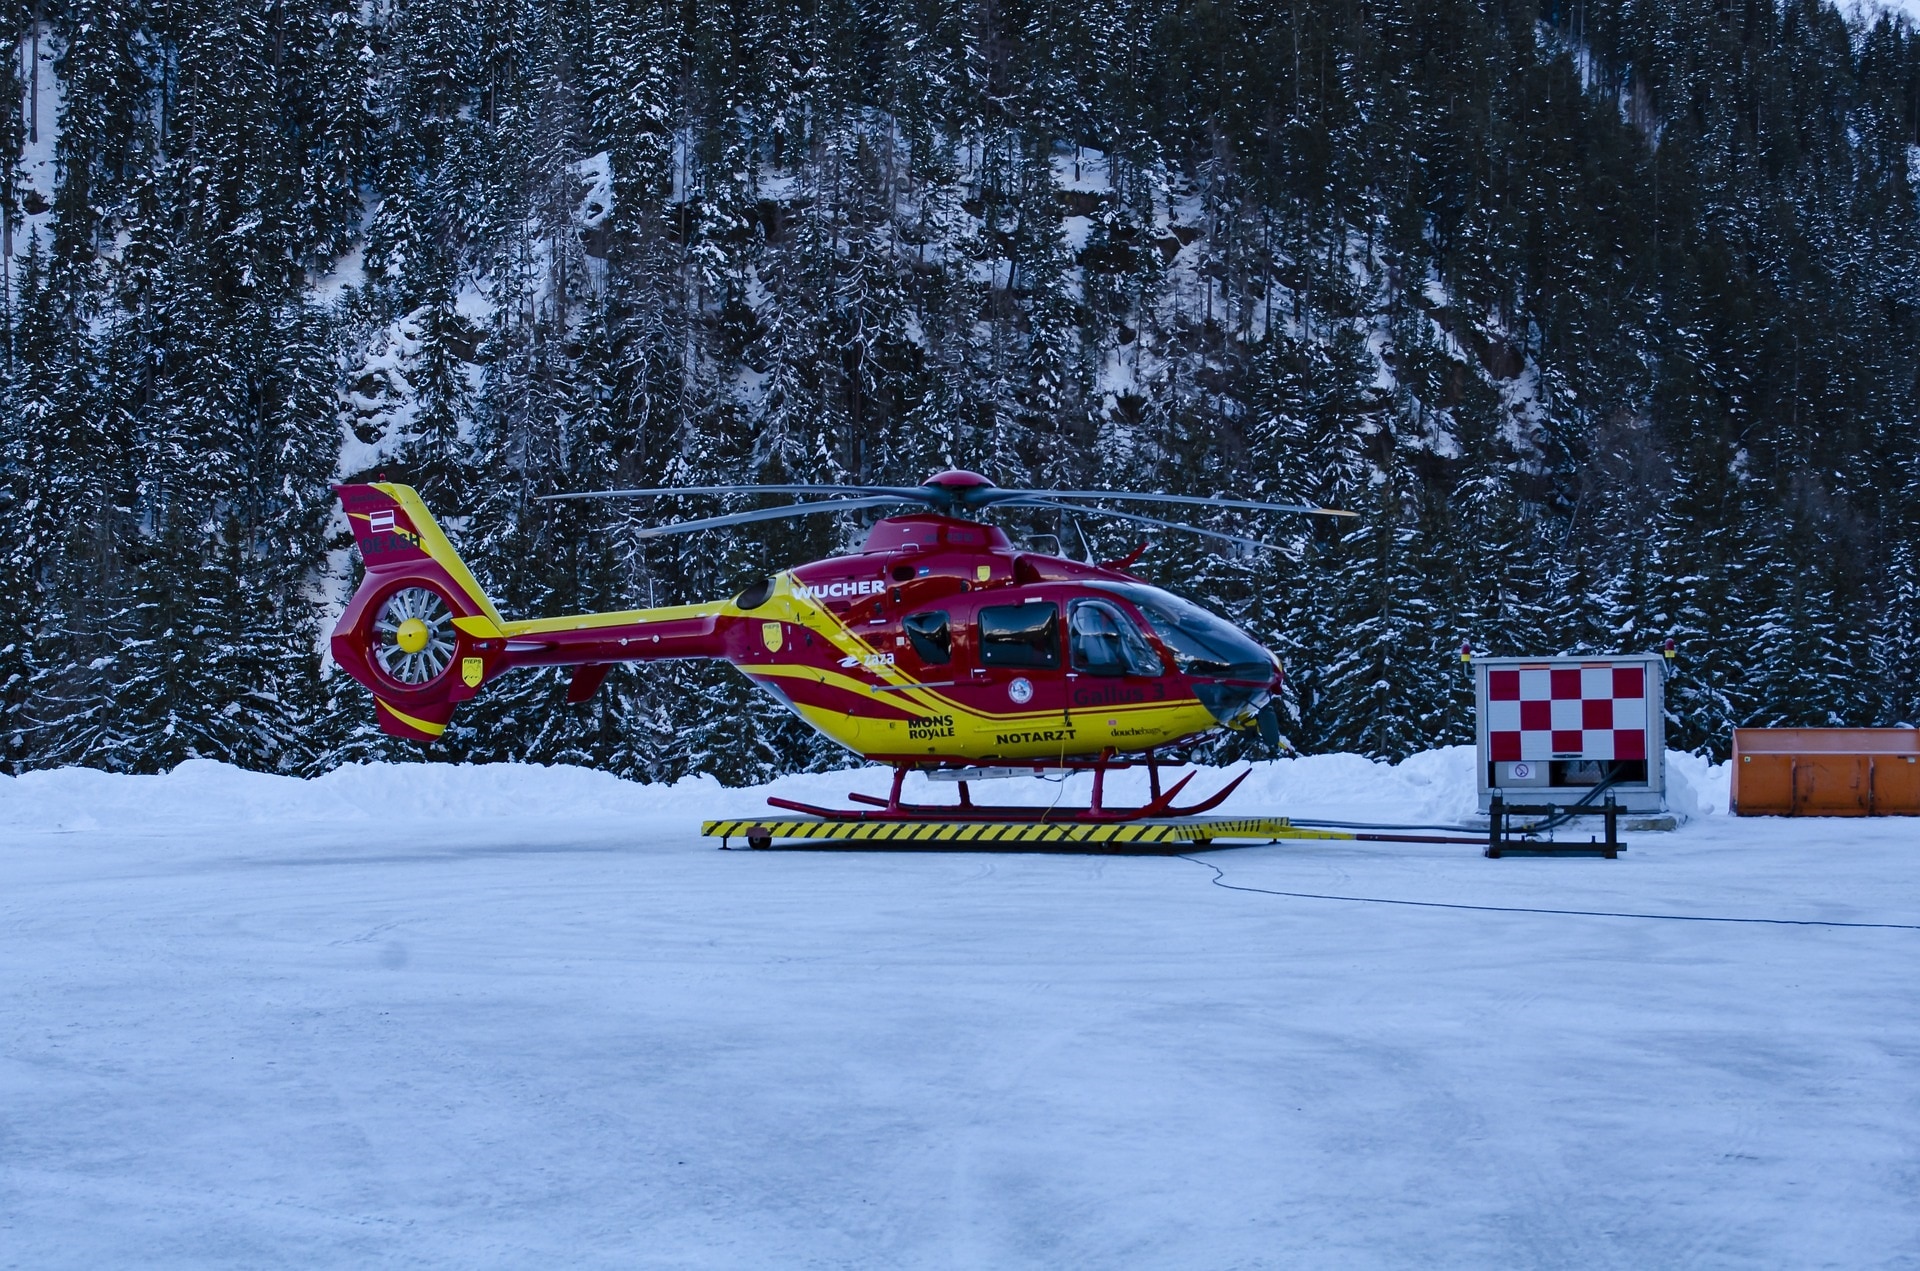 A helicopter landing in snow